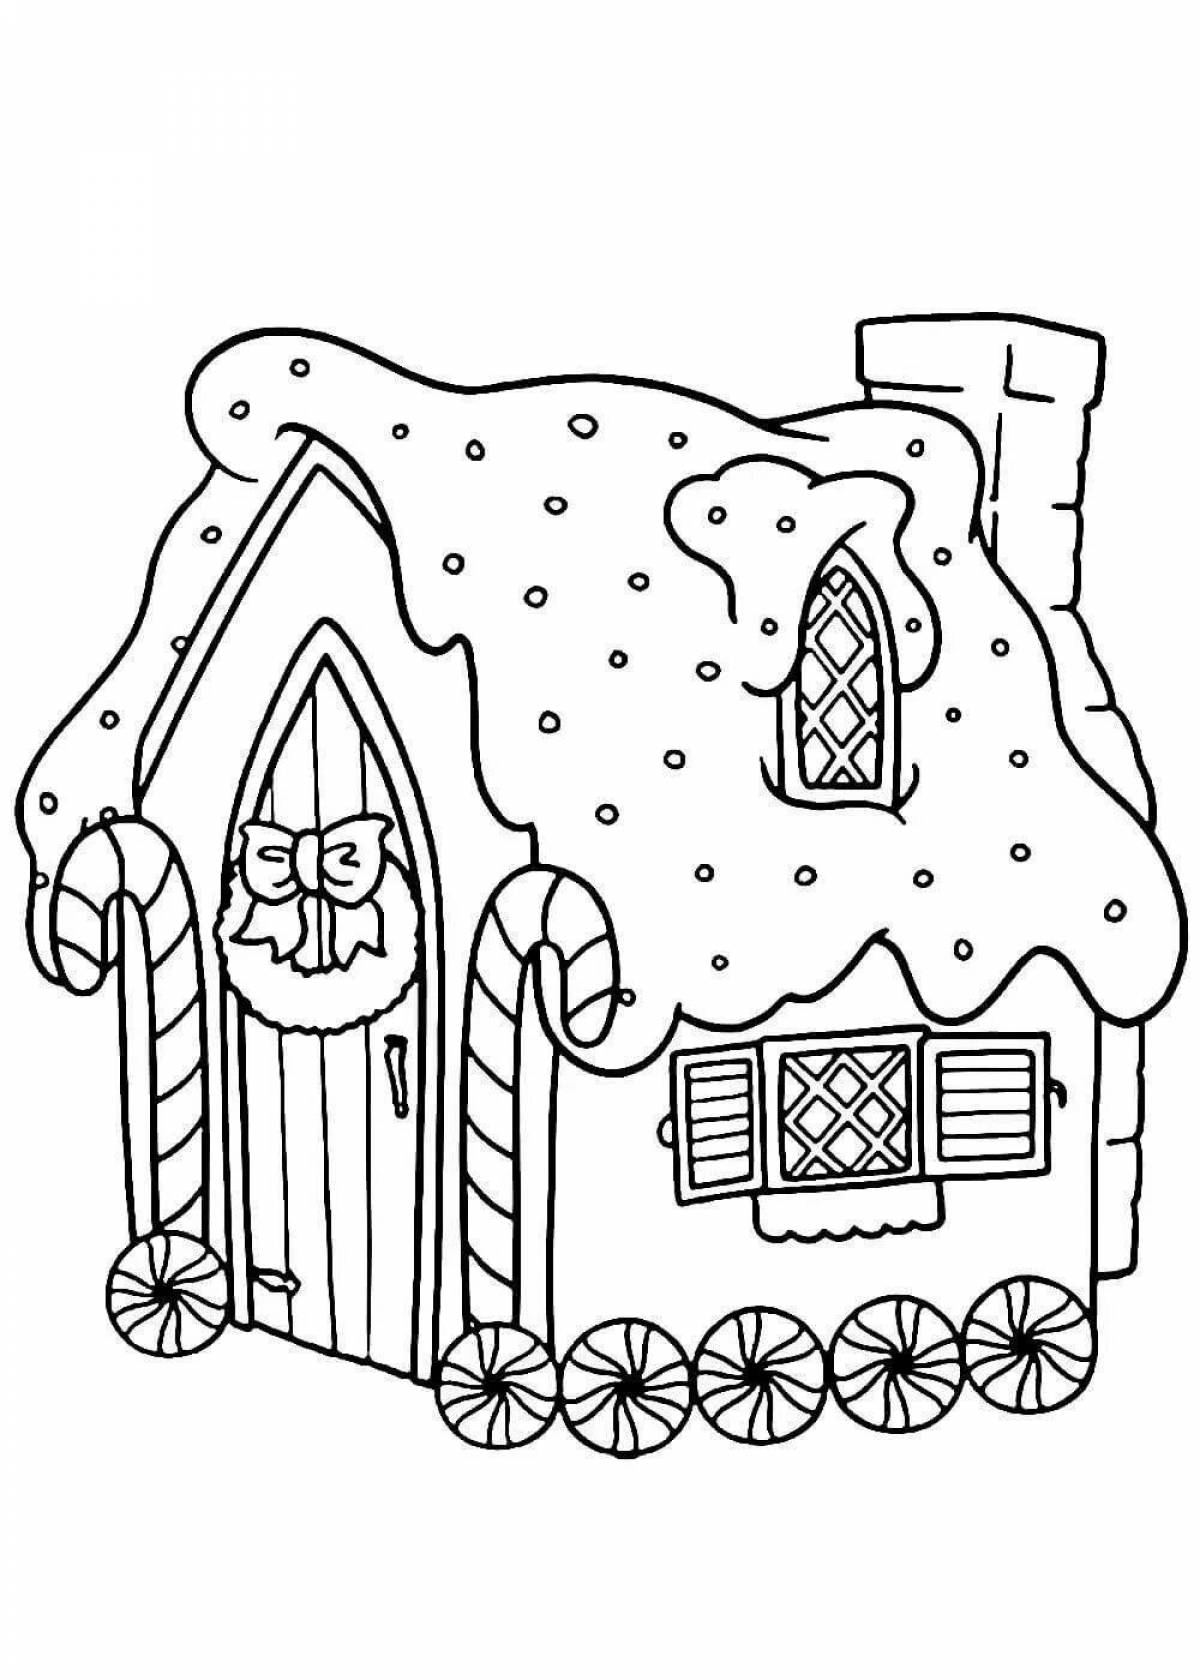 Intriguing fairytale gingerbread house coloring book